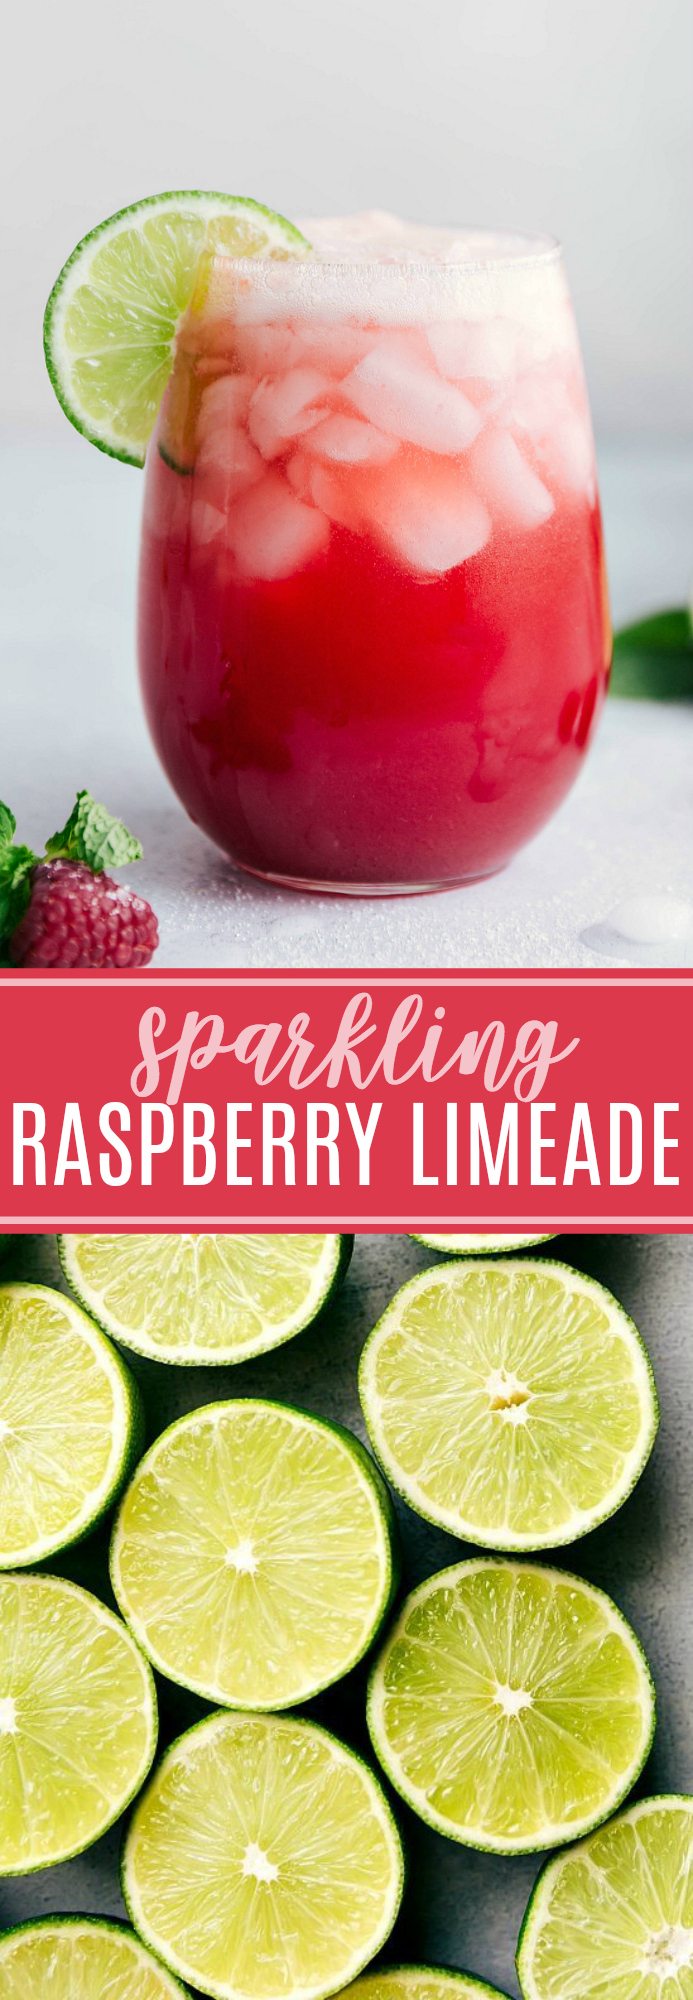 Sparkling raspberry limeade -- a delicious, refreshing, and simple drink to make via chelseasmessyapron.com #sonic #copycat #raspberry #limeade #drink #easy #quick #sparkling #raspberry #limeade #lime #party #beverage #kidfriendly